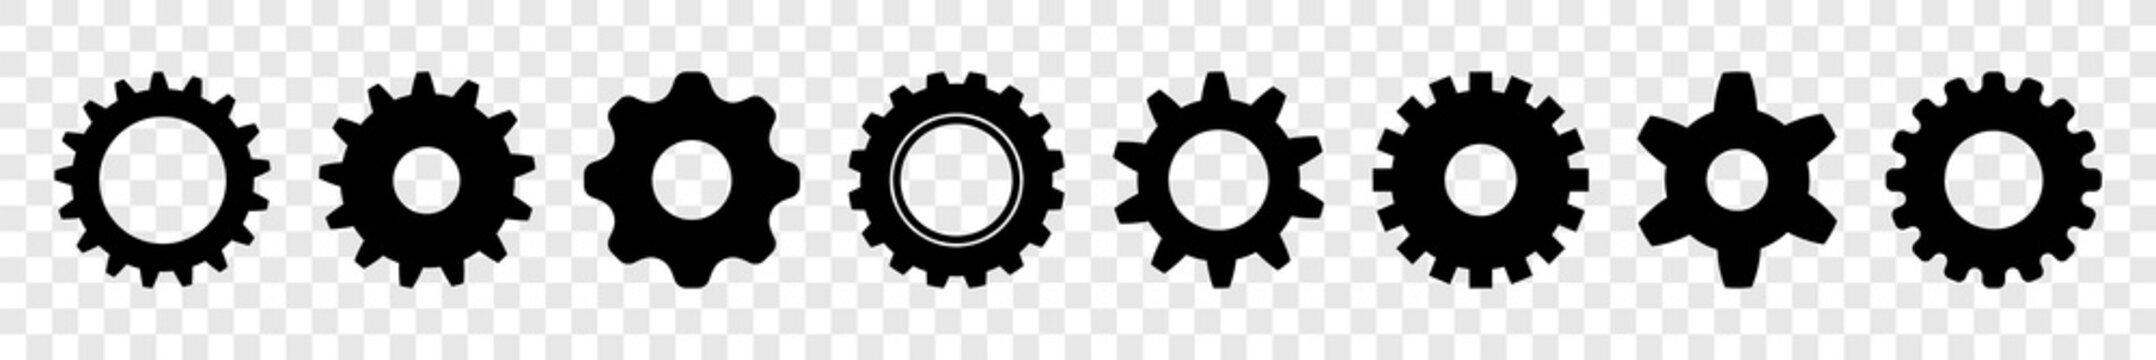 Set of different gear icon, on transparent background effect, vector illustration